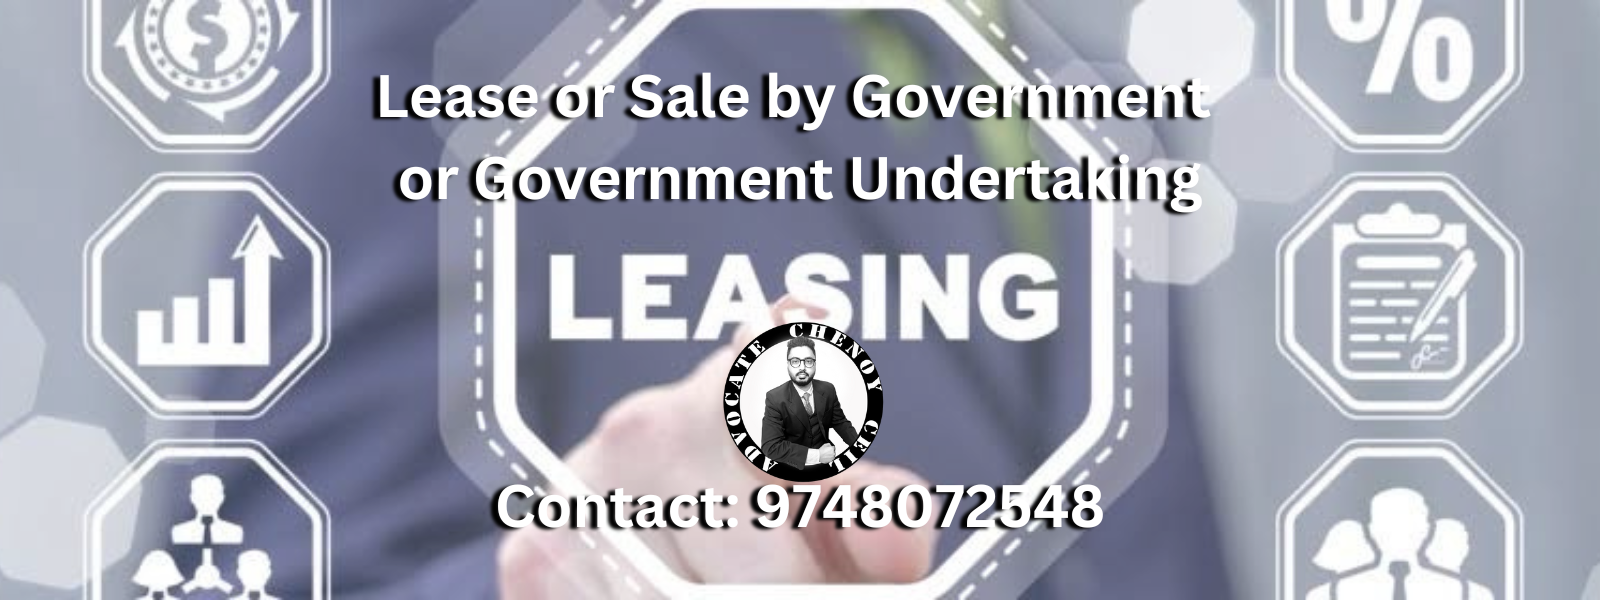 lease or sale by government undertaking